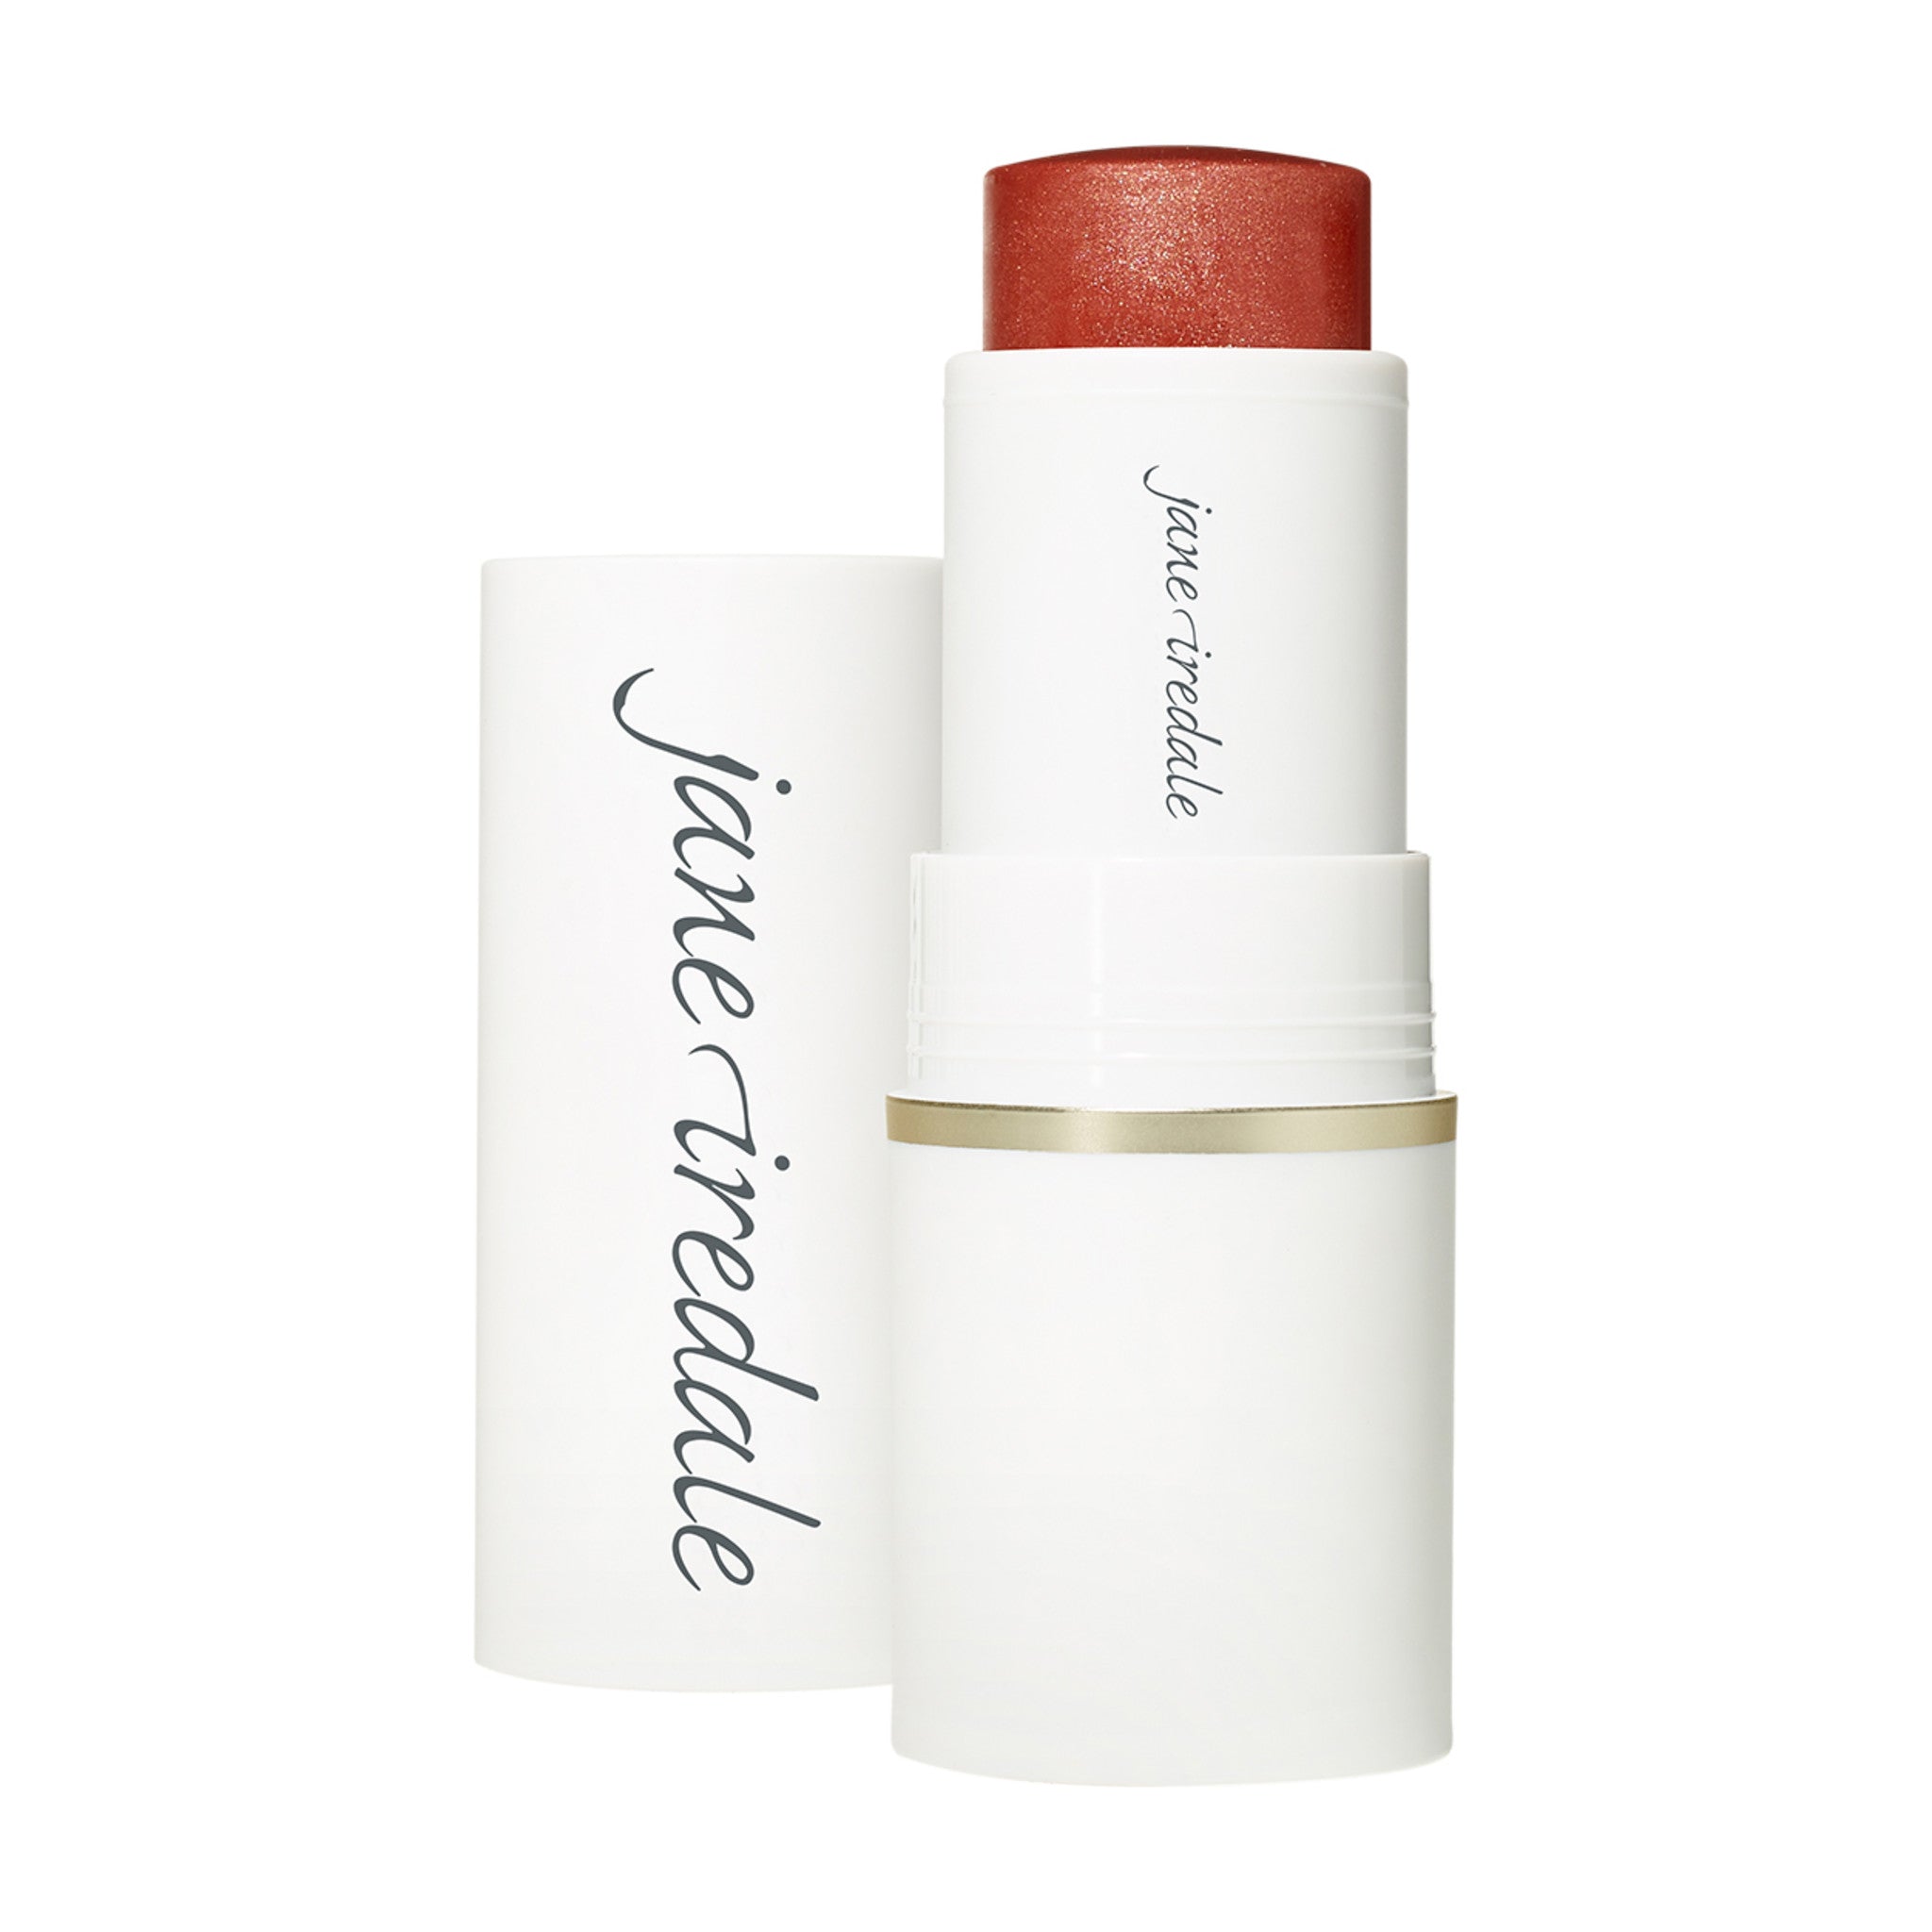 Jane Iredale Glow Time Blush Stick Color/Shade variant: Aura main image.